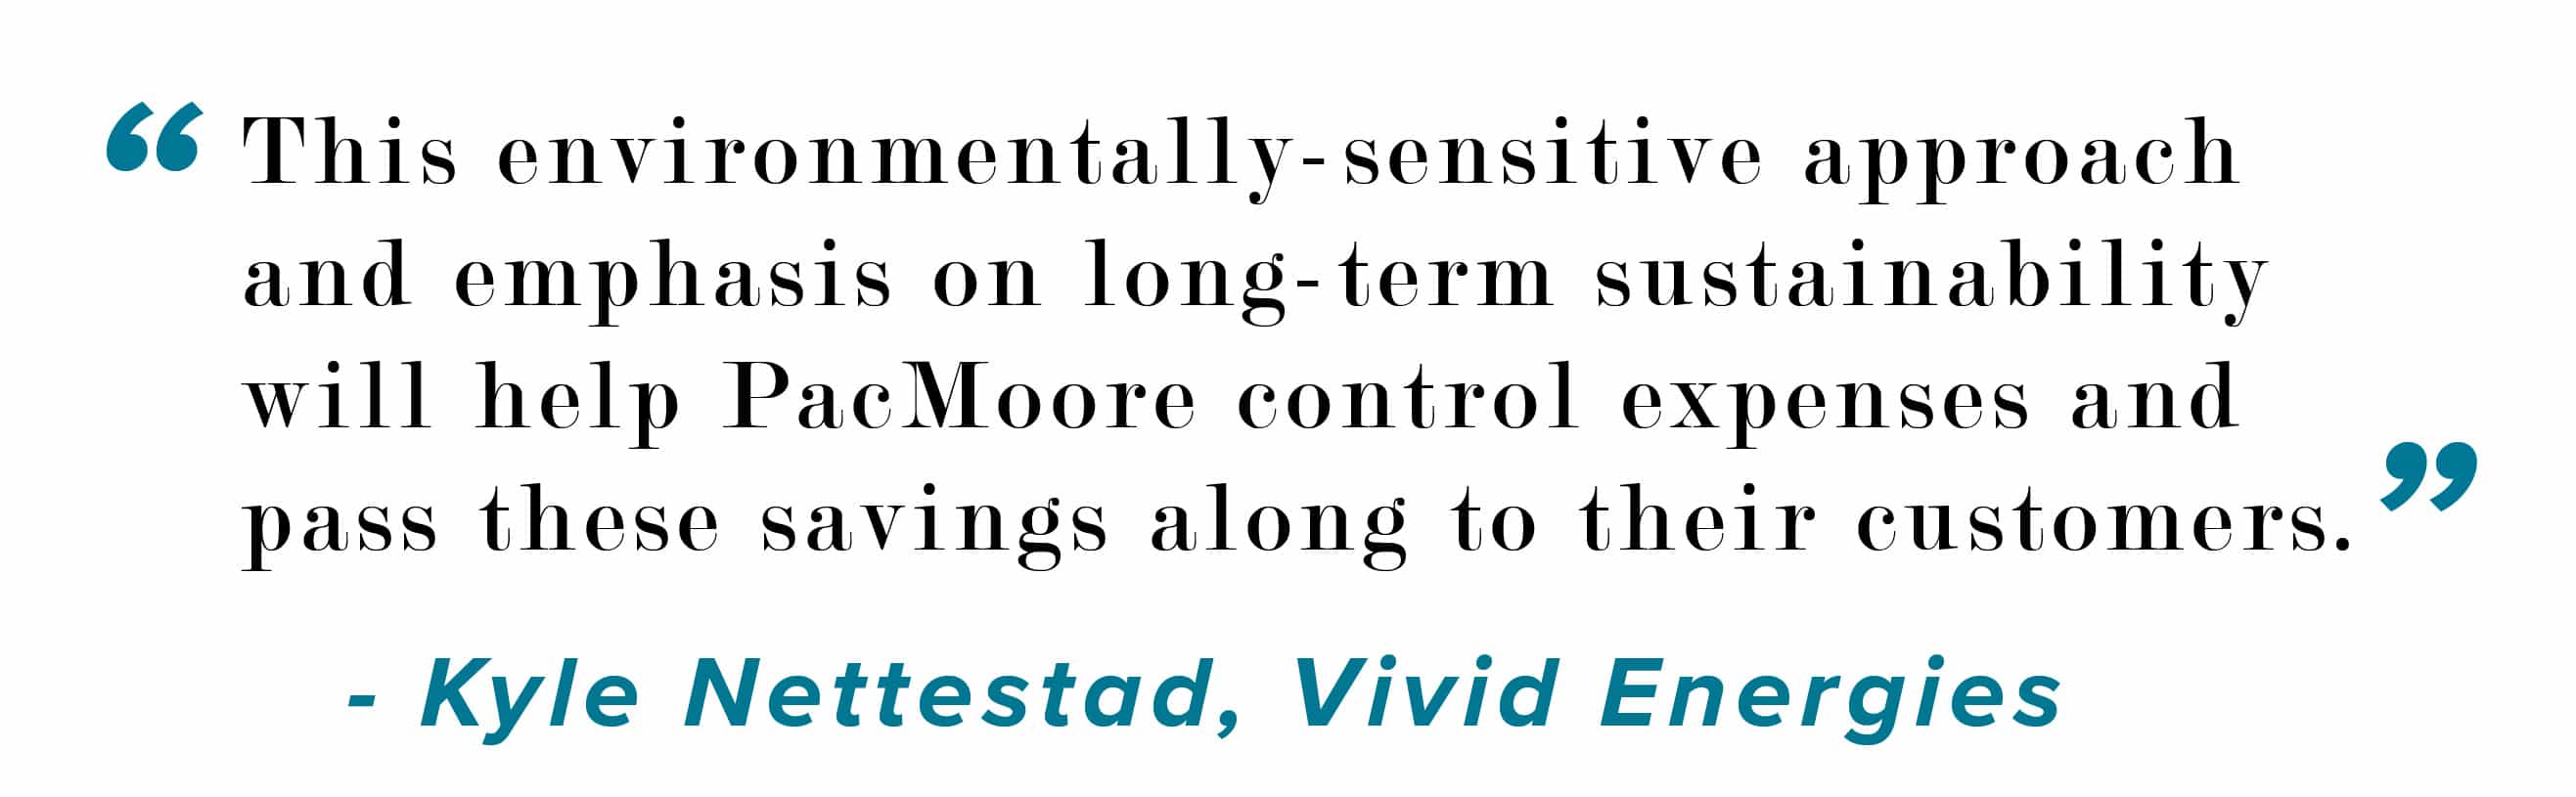 This environmentally -sensitive approach and emphasis on long-term sustainability will help PacMoore control expenses and pass these savings along to their customers. Kyle Nettestad, Vivid Energies